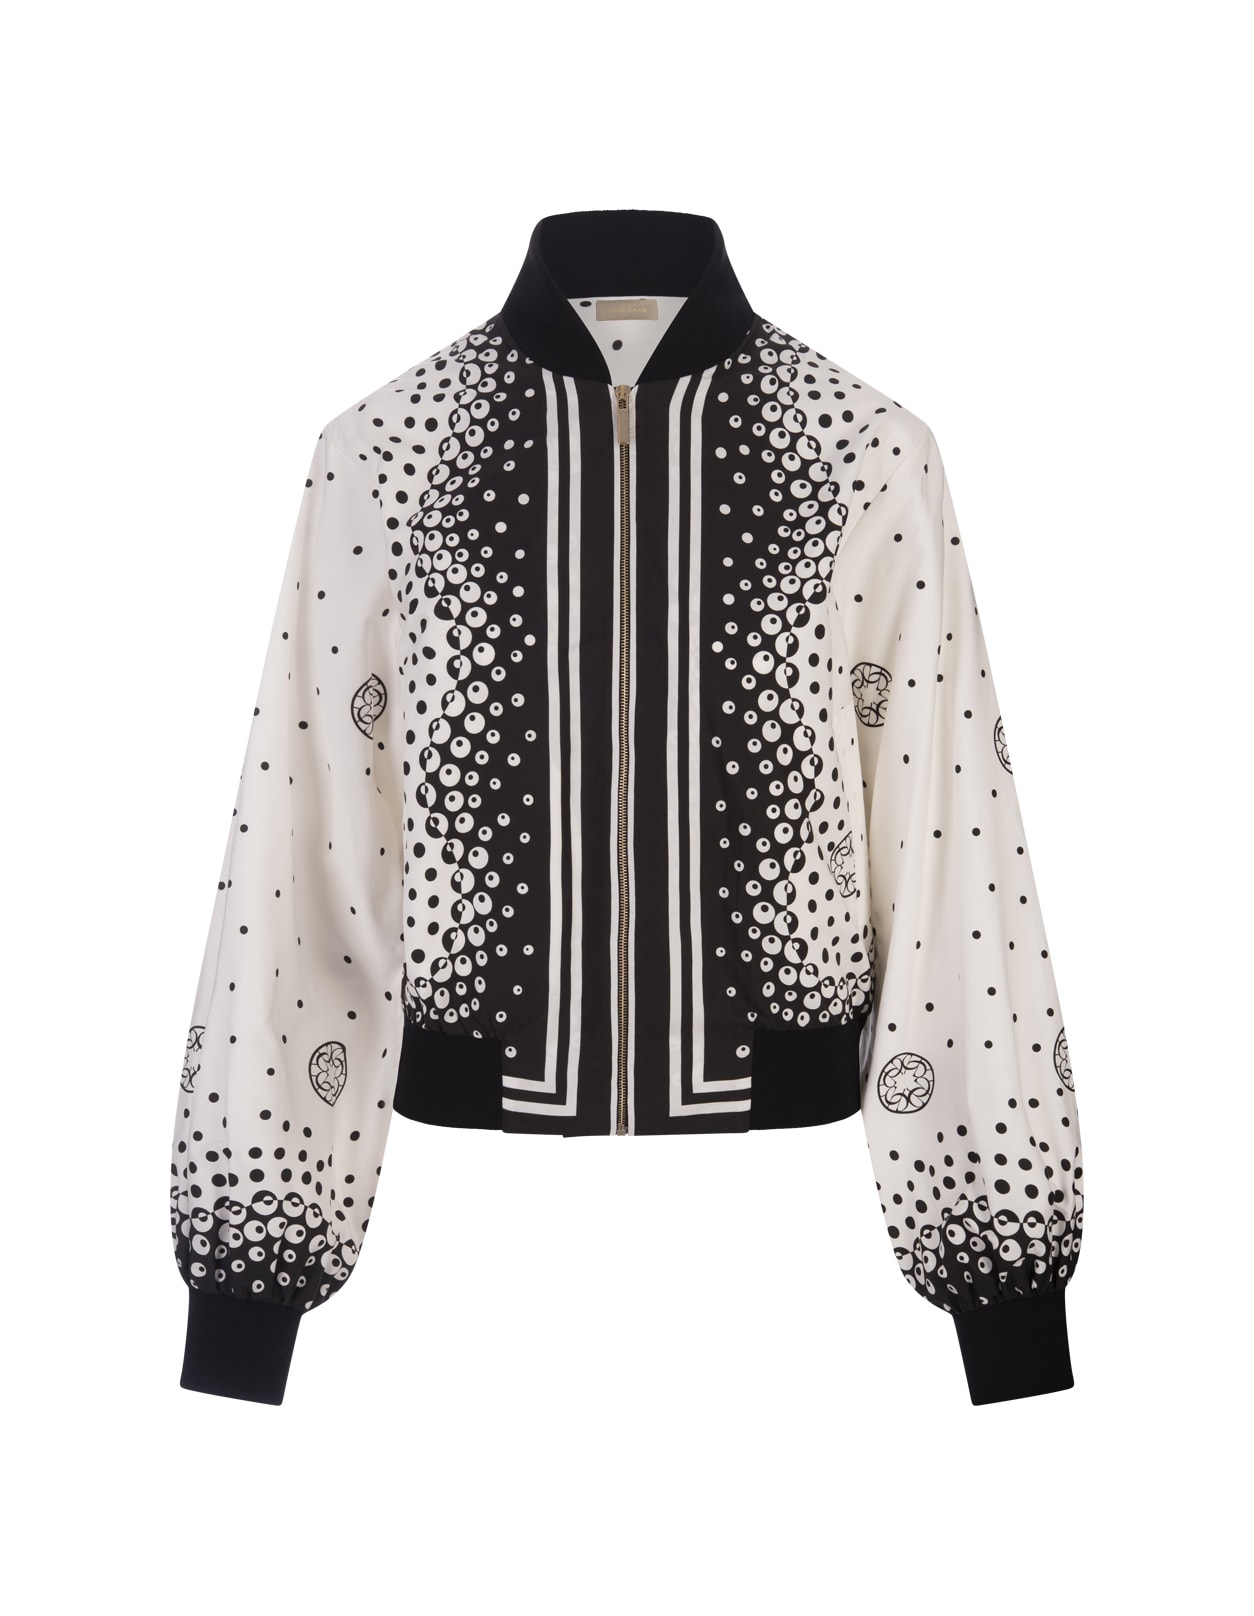 Elie Saab Moon Printed Cotton Bomber Jacket In White And Black